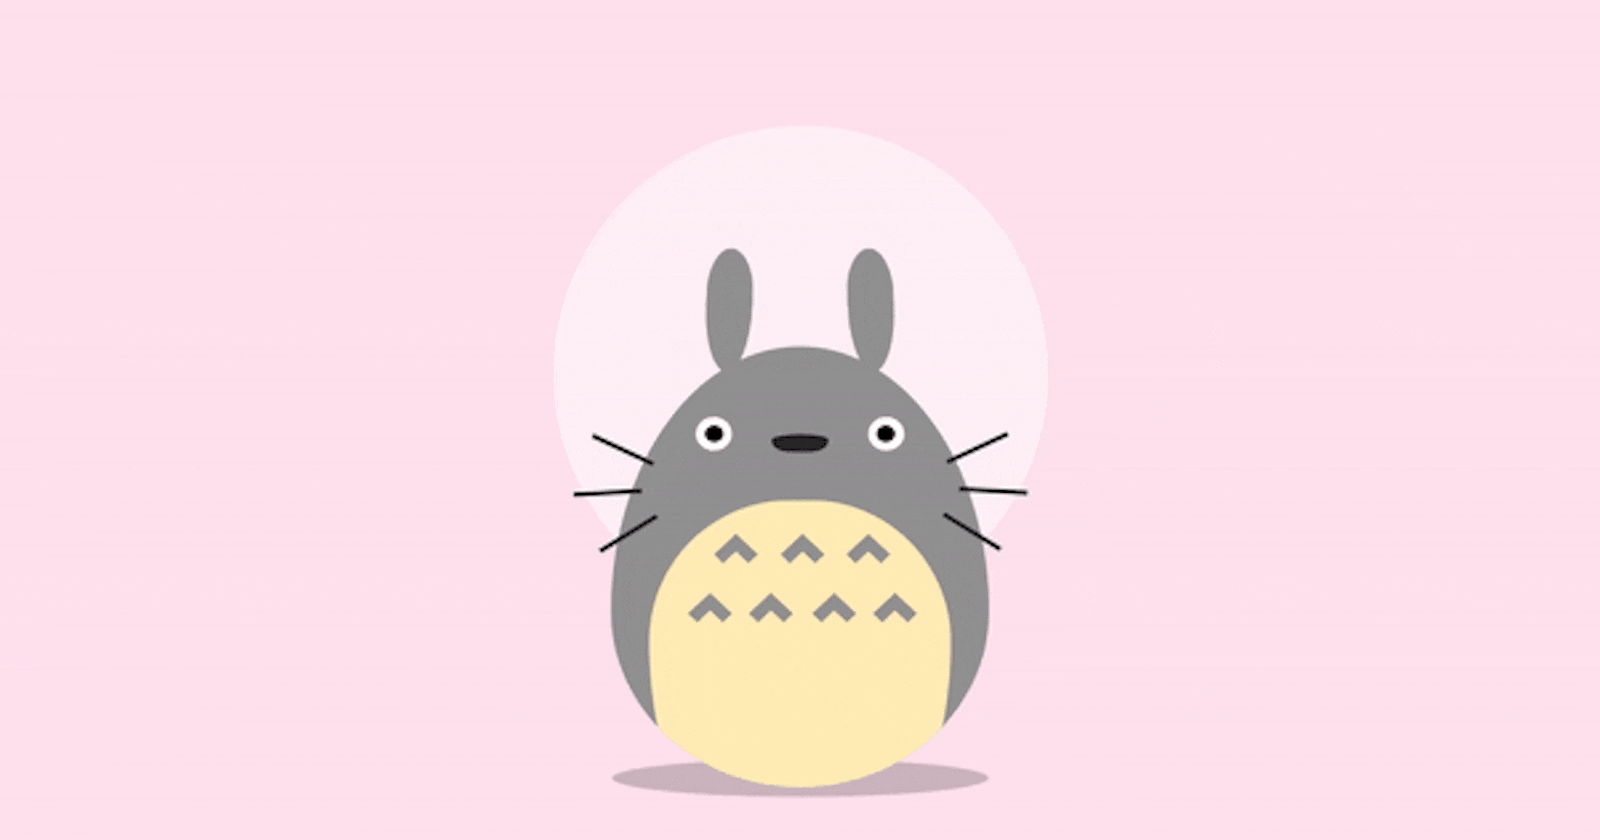 Building an Animated Jumping Totoro Using HTML and CSS